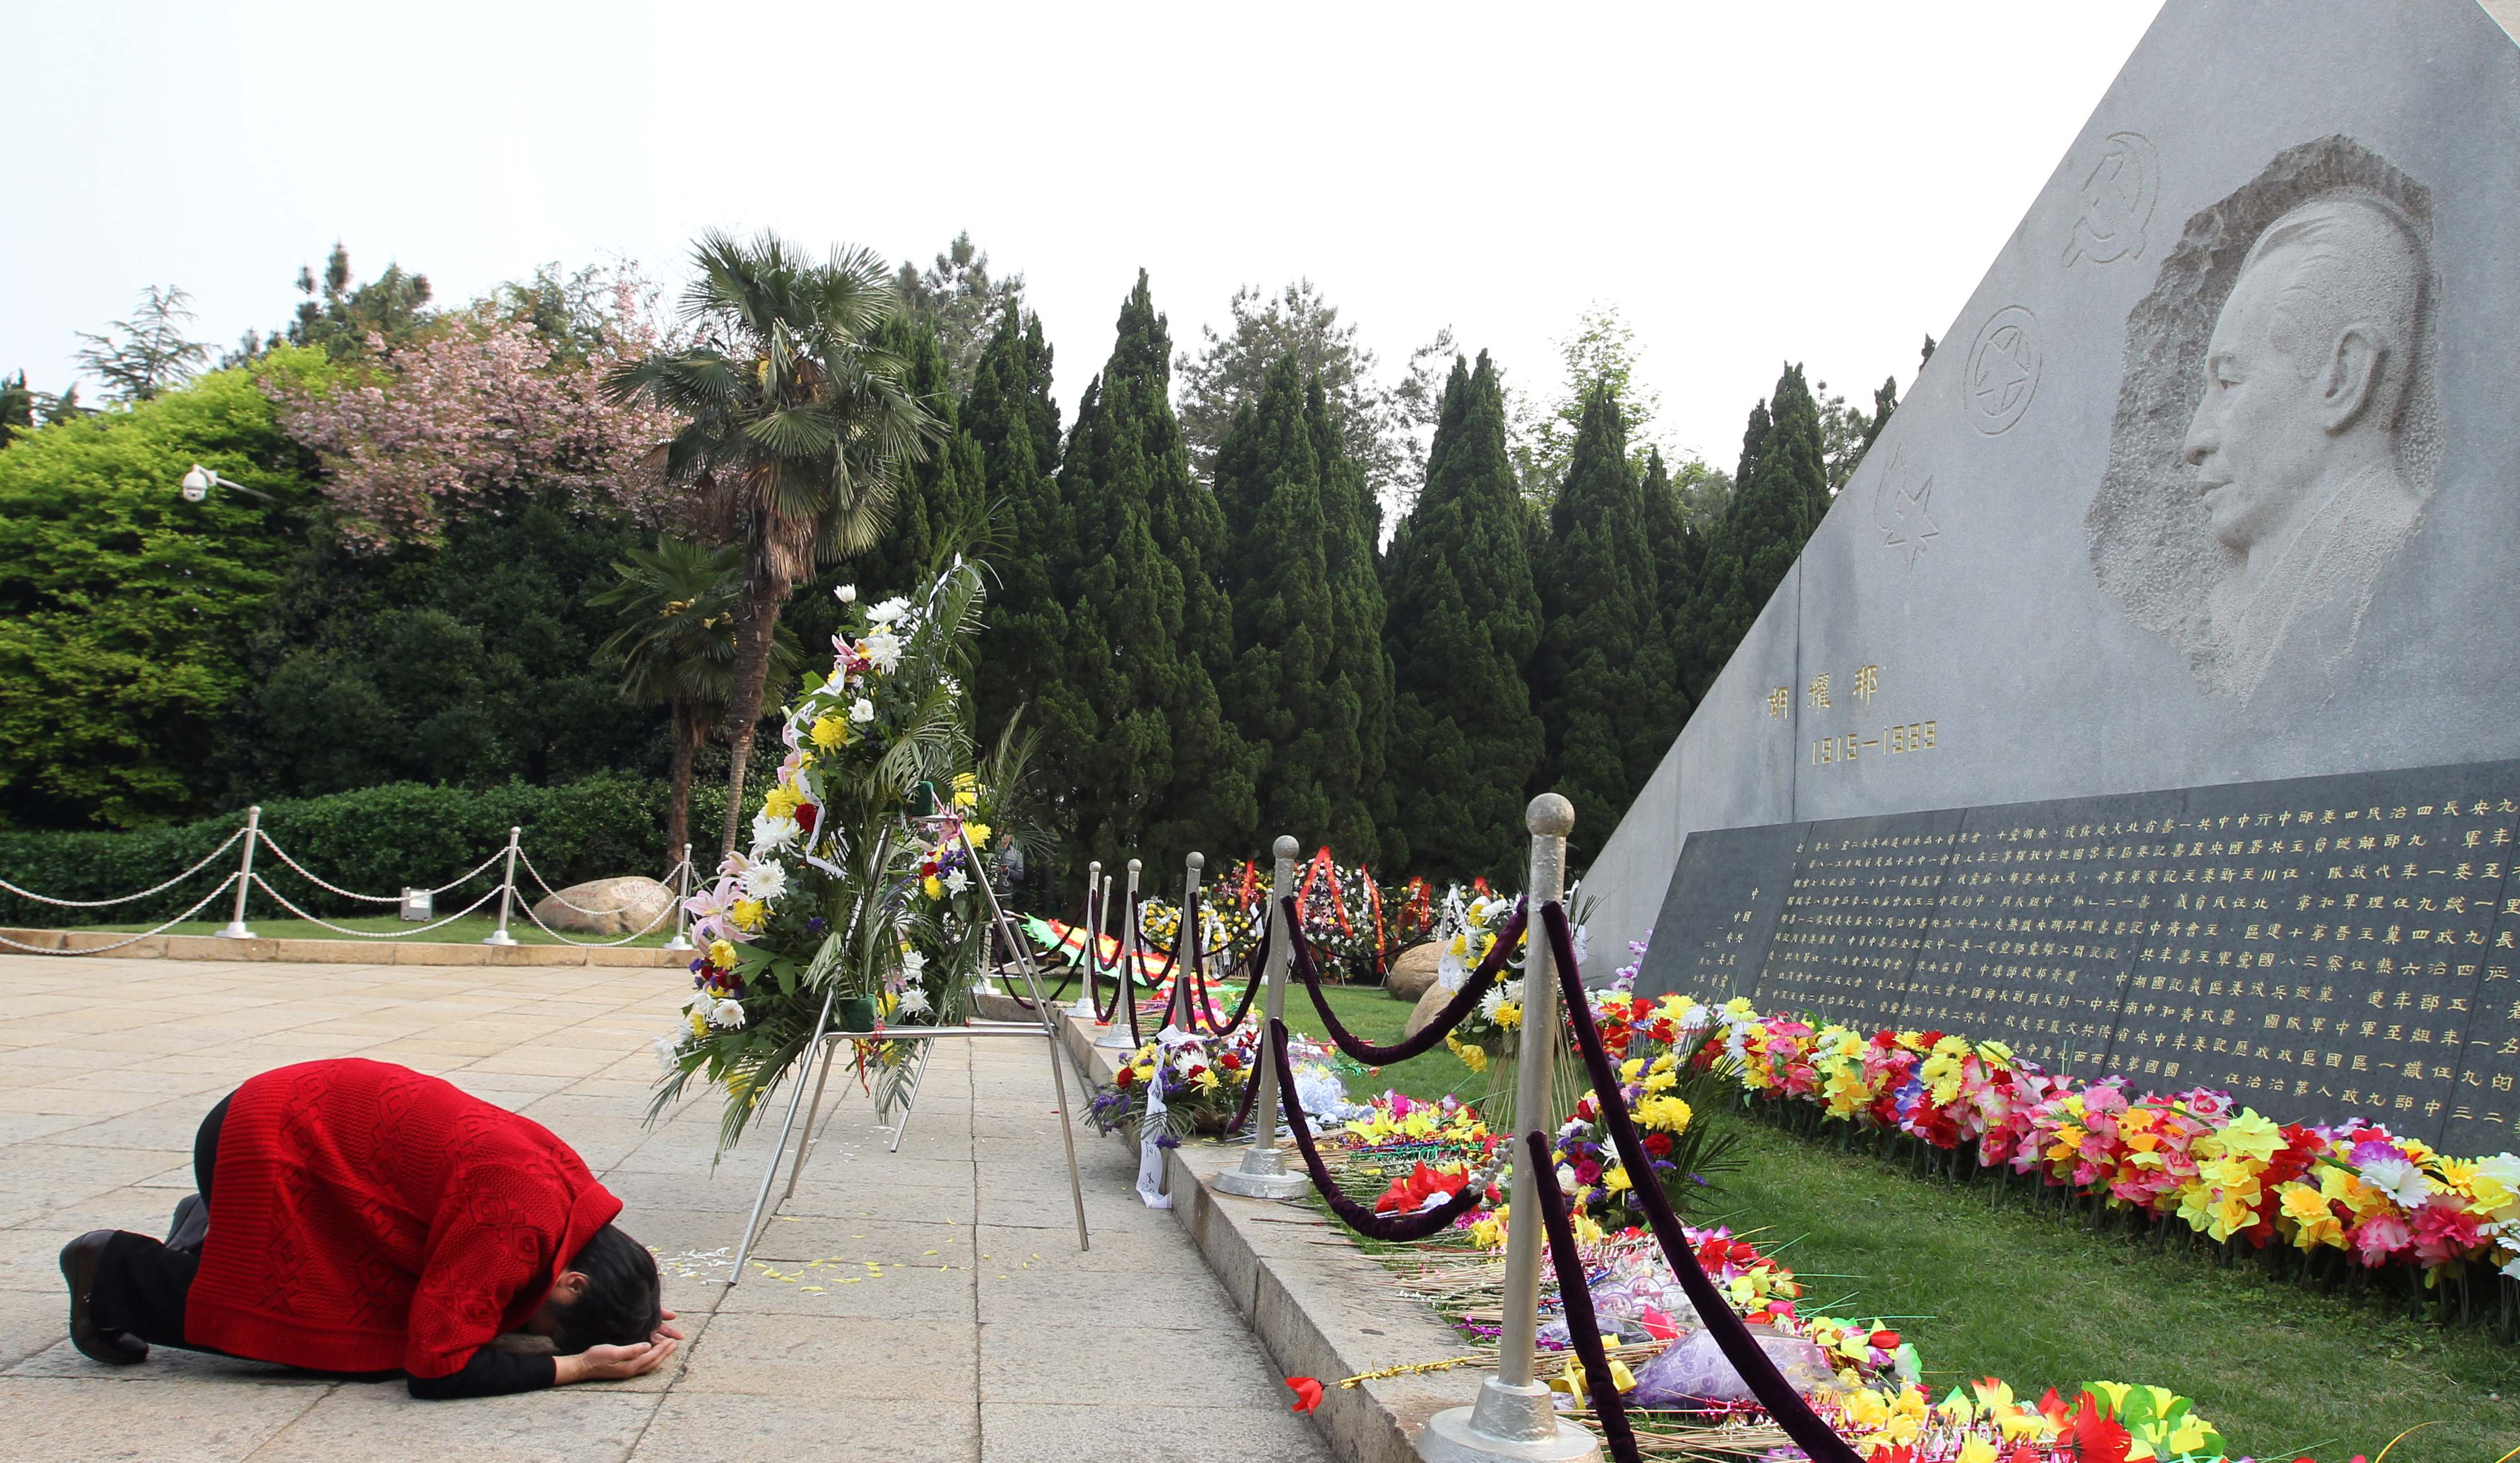 Ms Cao from Hunan province pays respect to Hu Yaobang at the Fuhua Mountain Yaobang Memorial Park in Gongqingcheng, Jiujiang city, Jiangxi province, on Apr. 04, 2014. Many people come to pay respect for late General Secretary of Communist Party of China (CPC) Hu Yaobang during the Qingming Festival. 04APR14 Photo by Simon Song